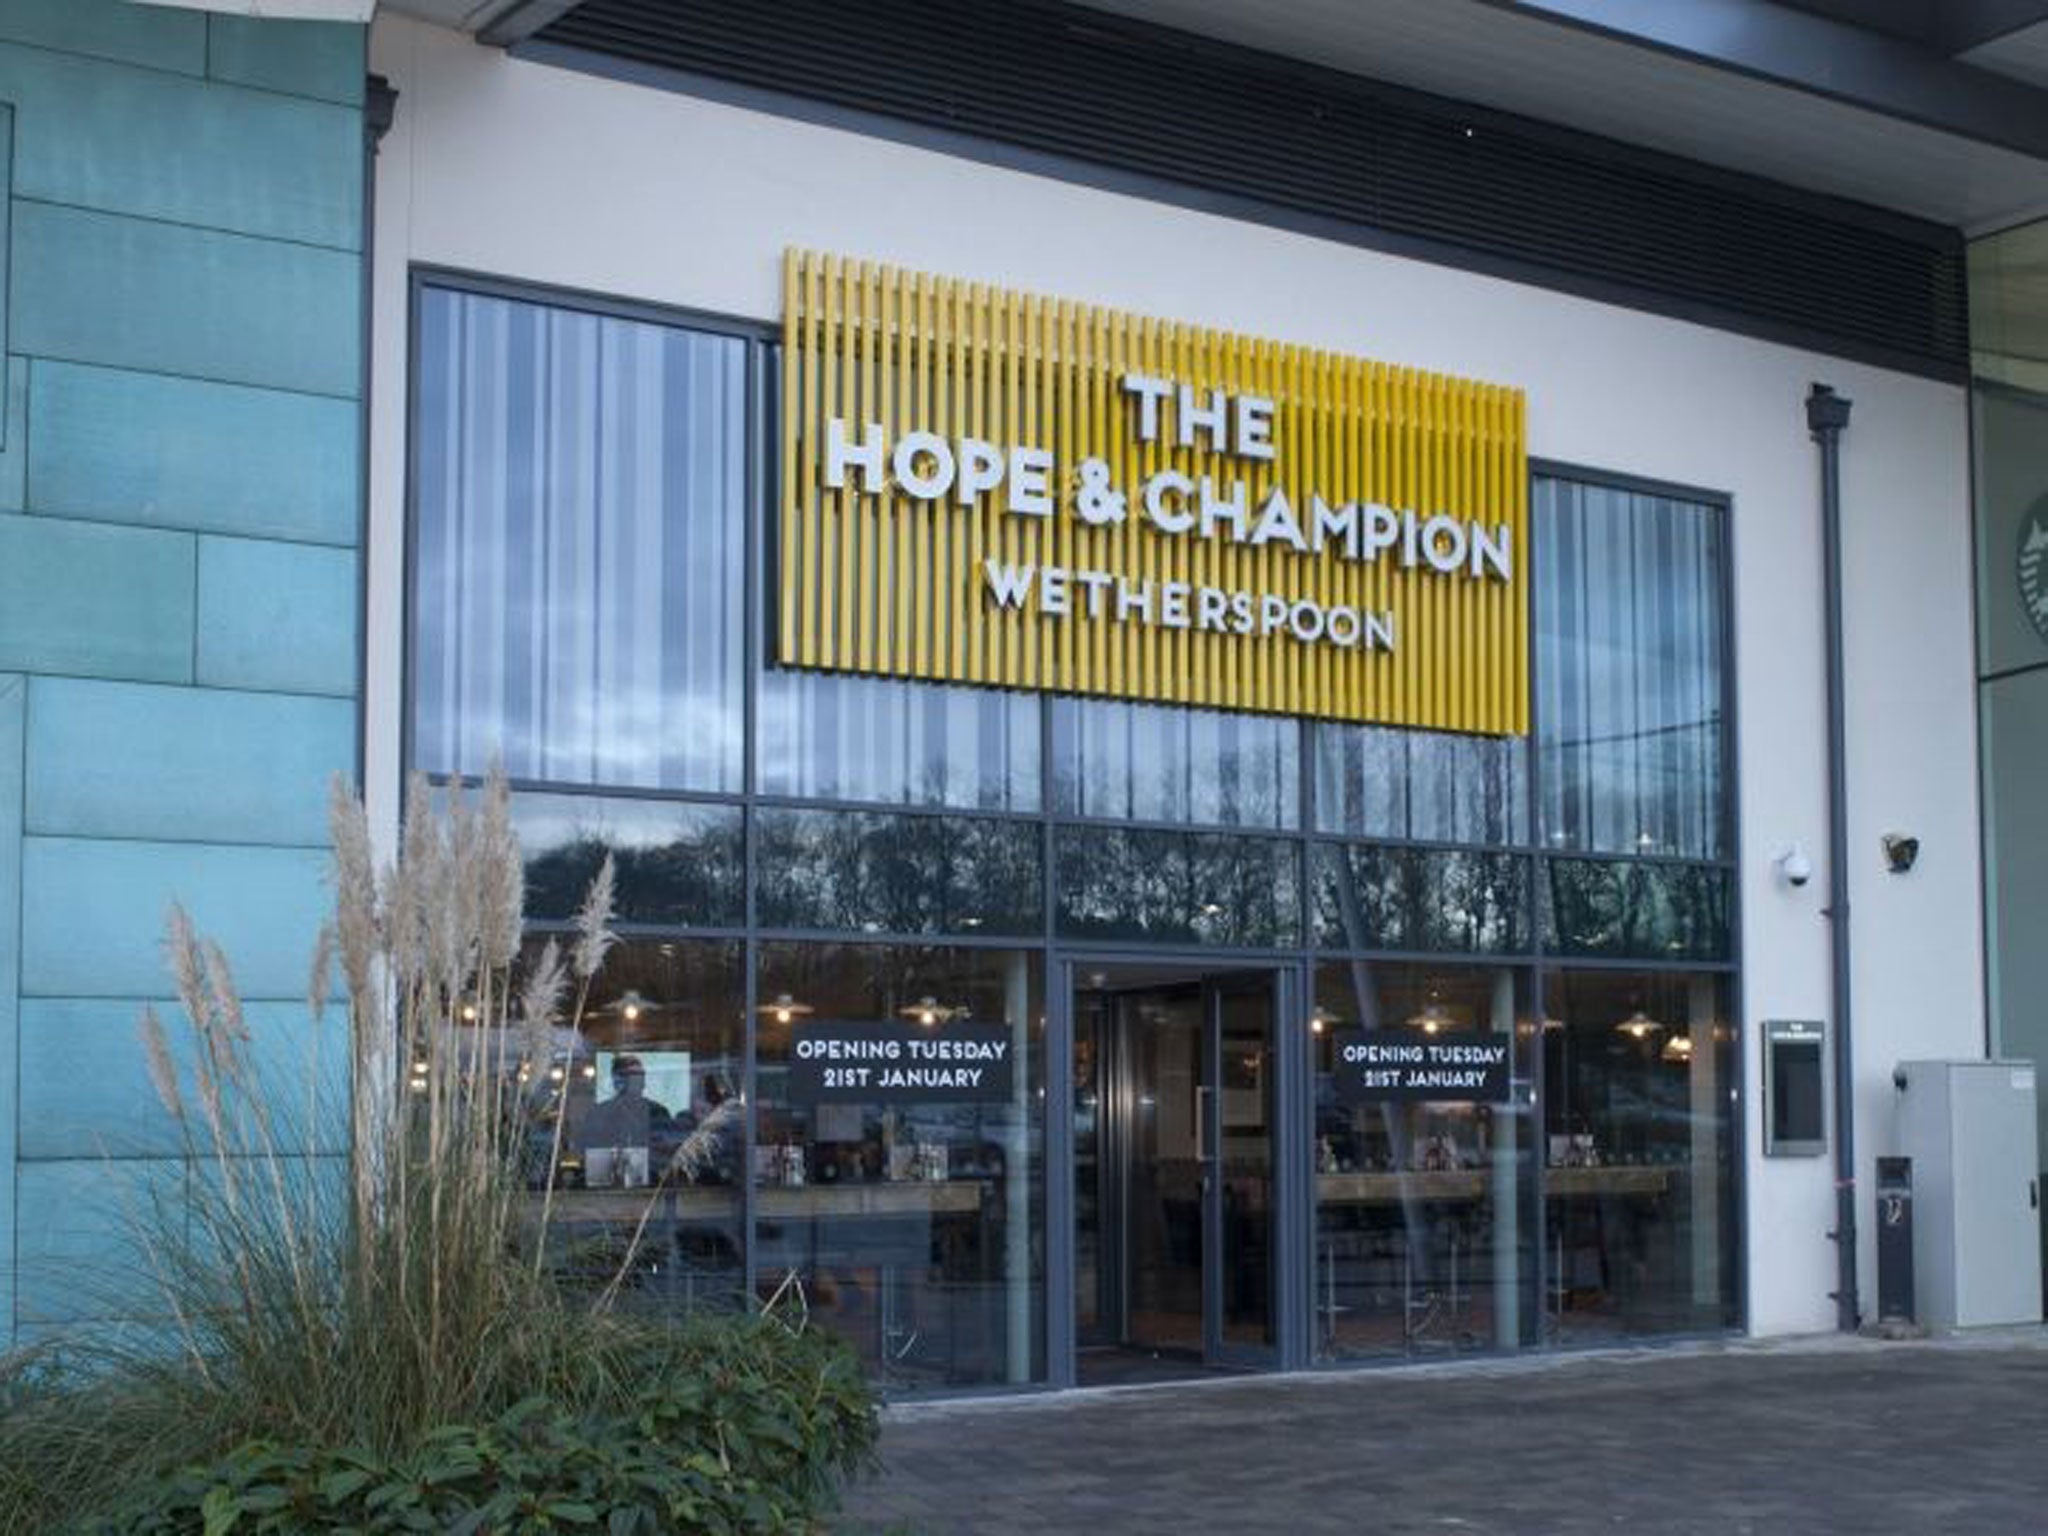 The new JD Wetherspoon pub which has opened at the Extra Motorway Service Area at junction 2 of the M40 in Beaconsfield